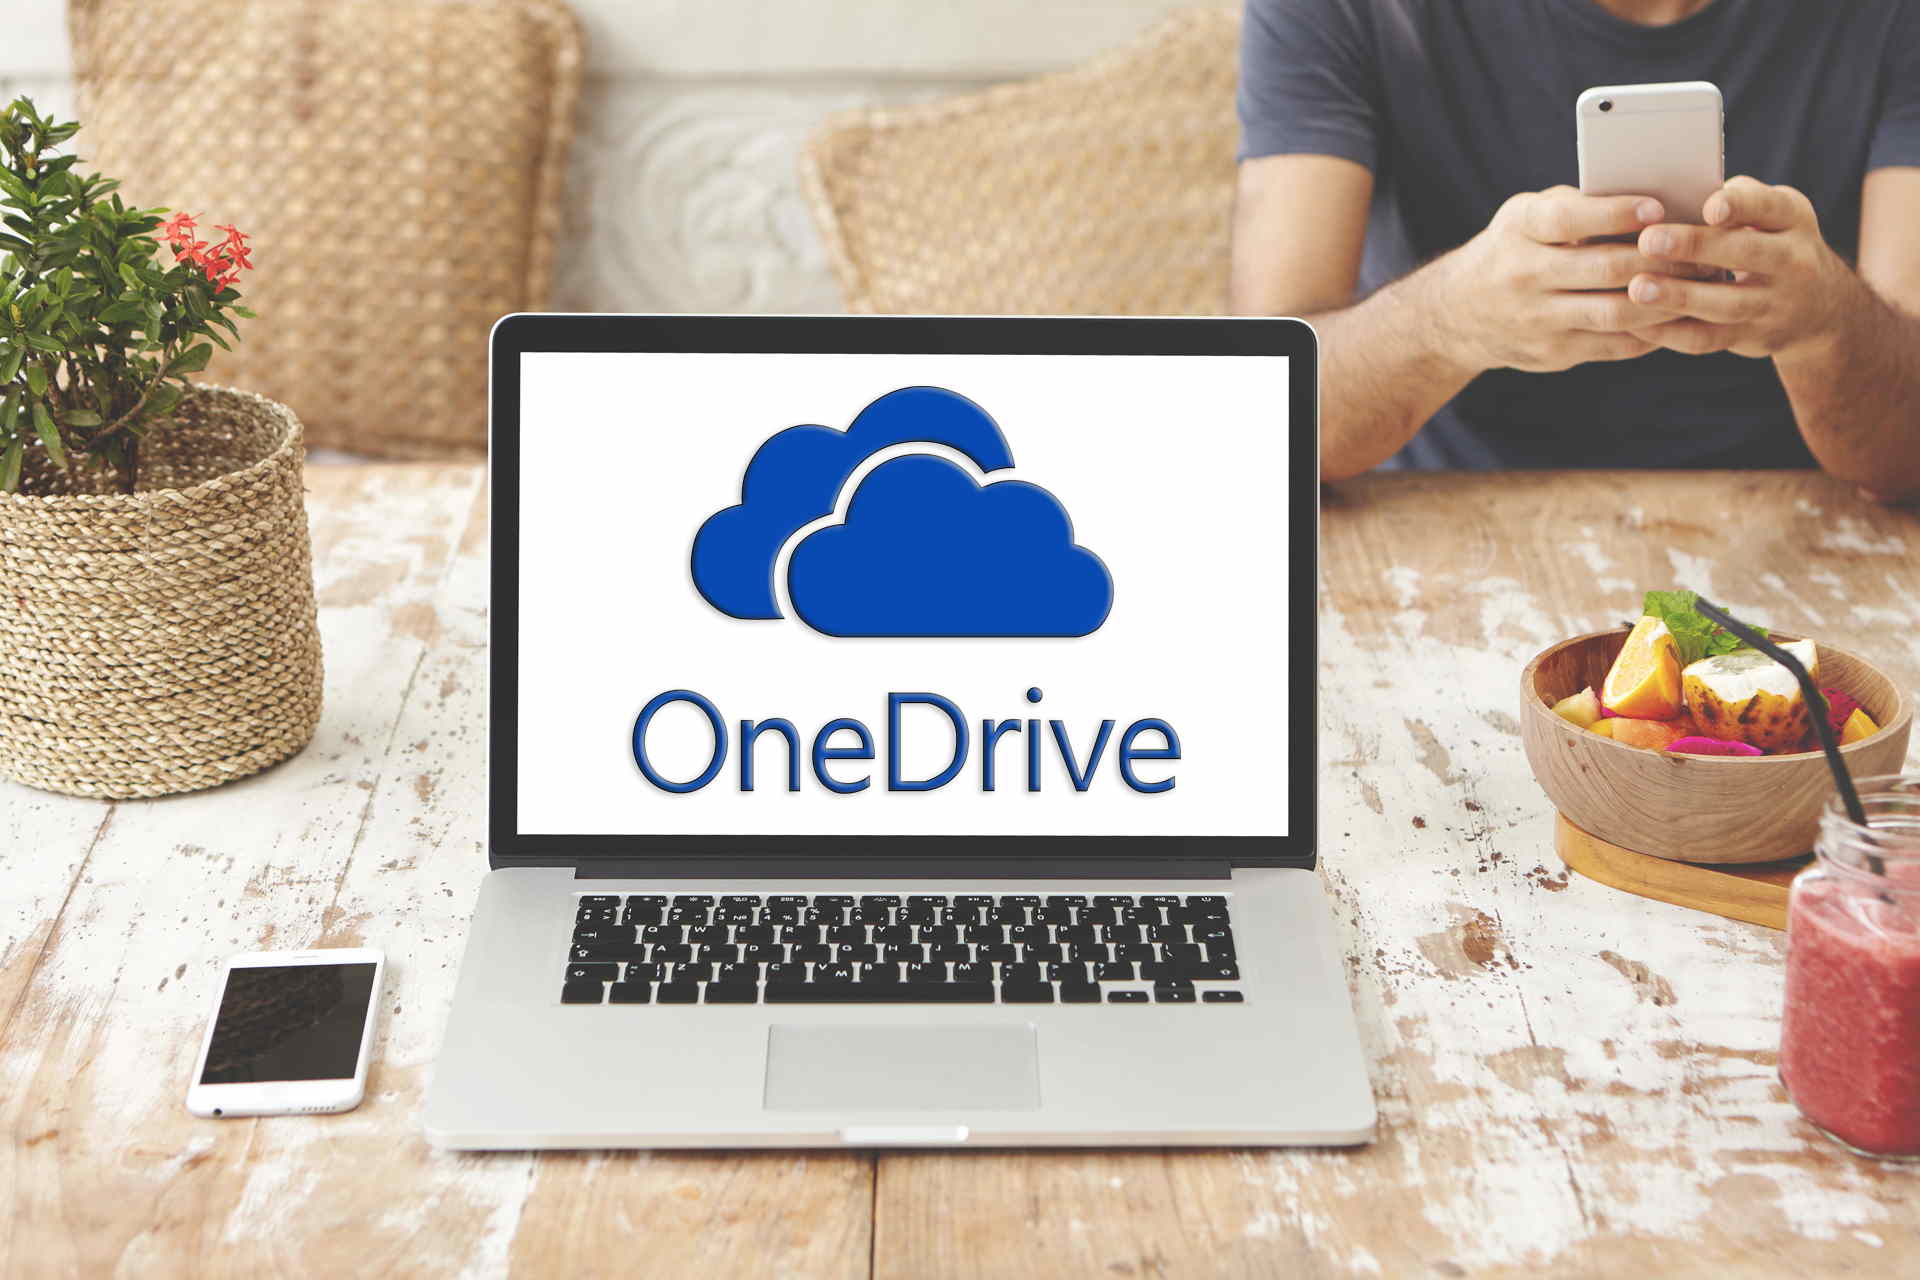 Files already exist in this folder OneDrive error